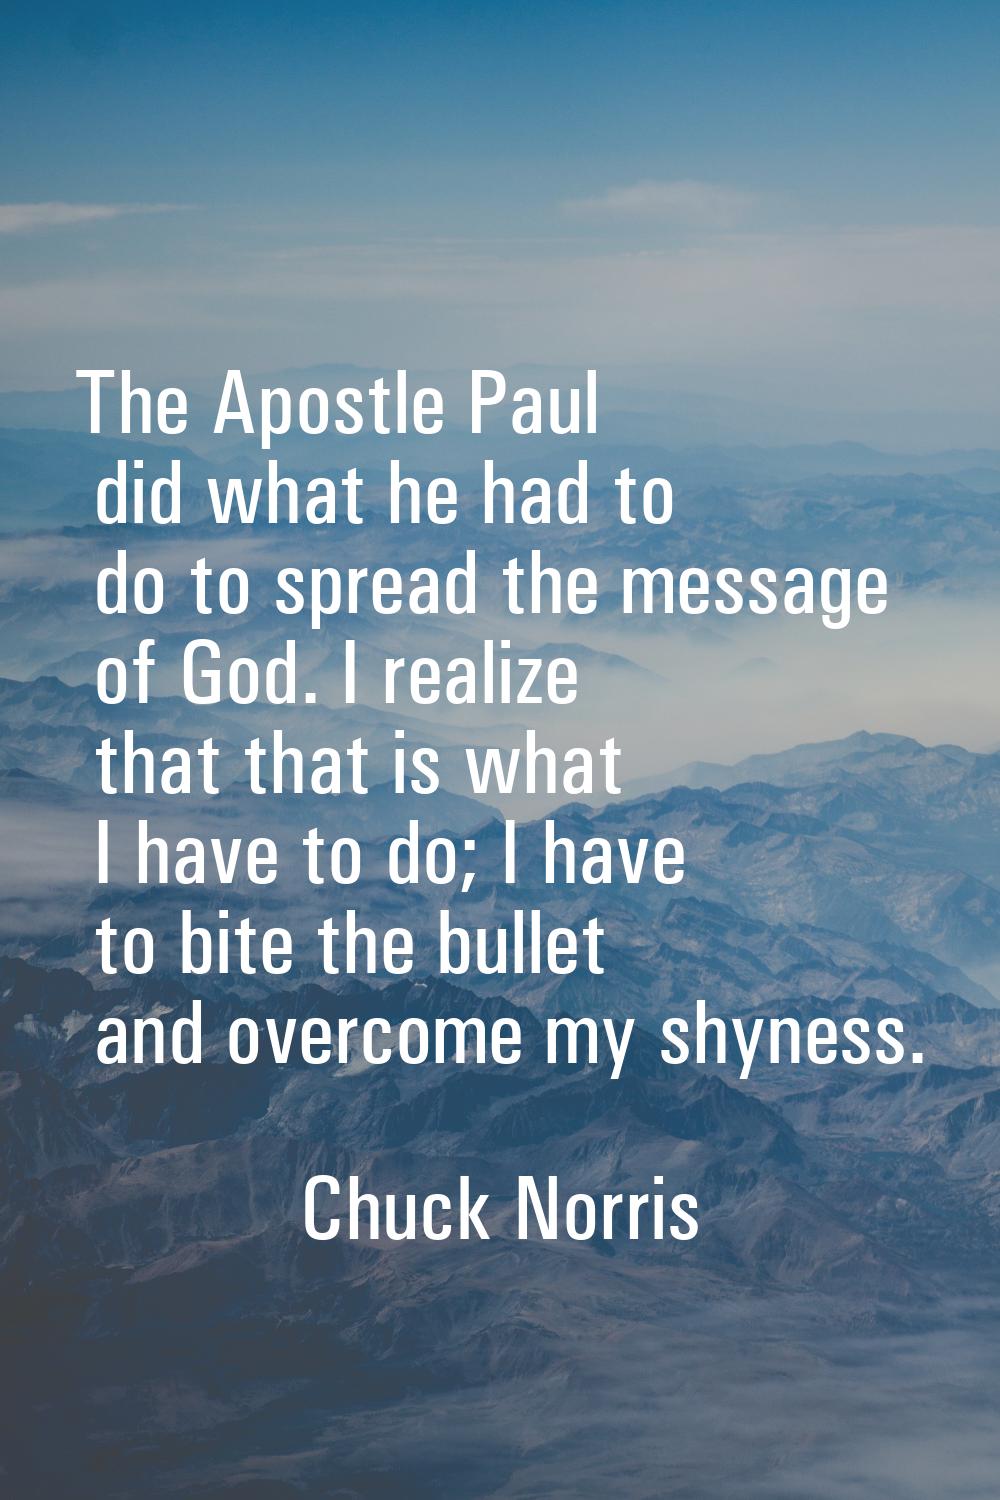 The Apostle Paul did what he had to do to spread the message of God. I realize that that is what I 